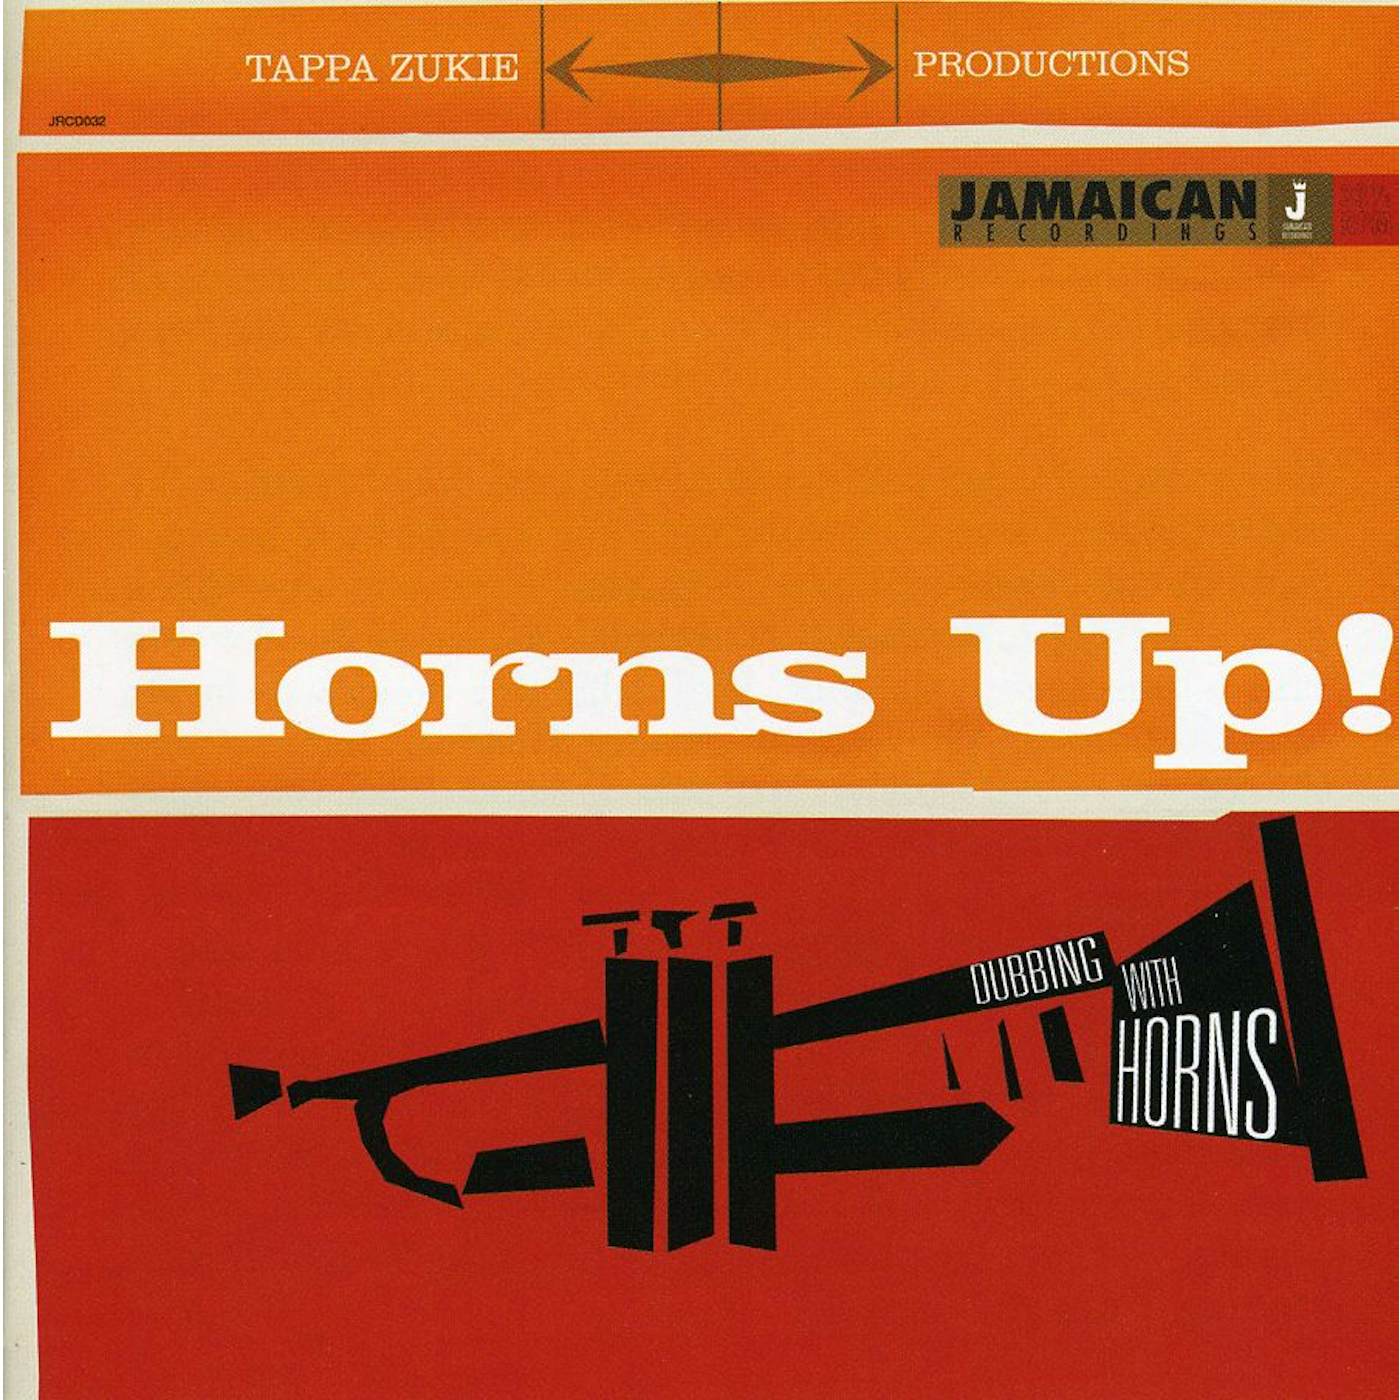 Tappa Zukie HORNS UP DUBBING WITH HORNS CD